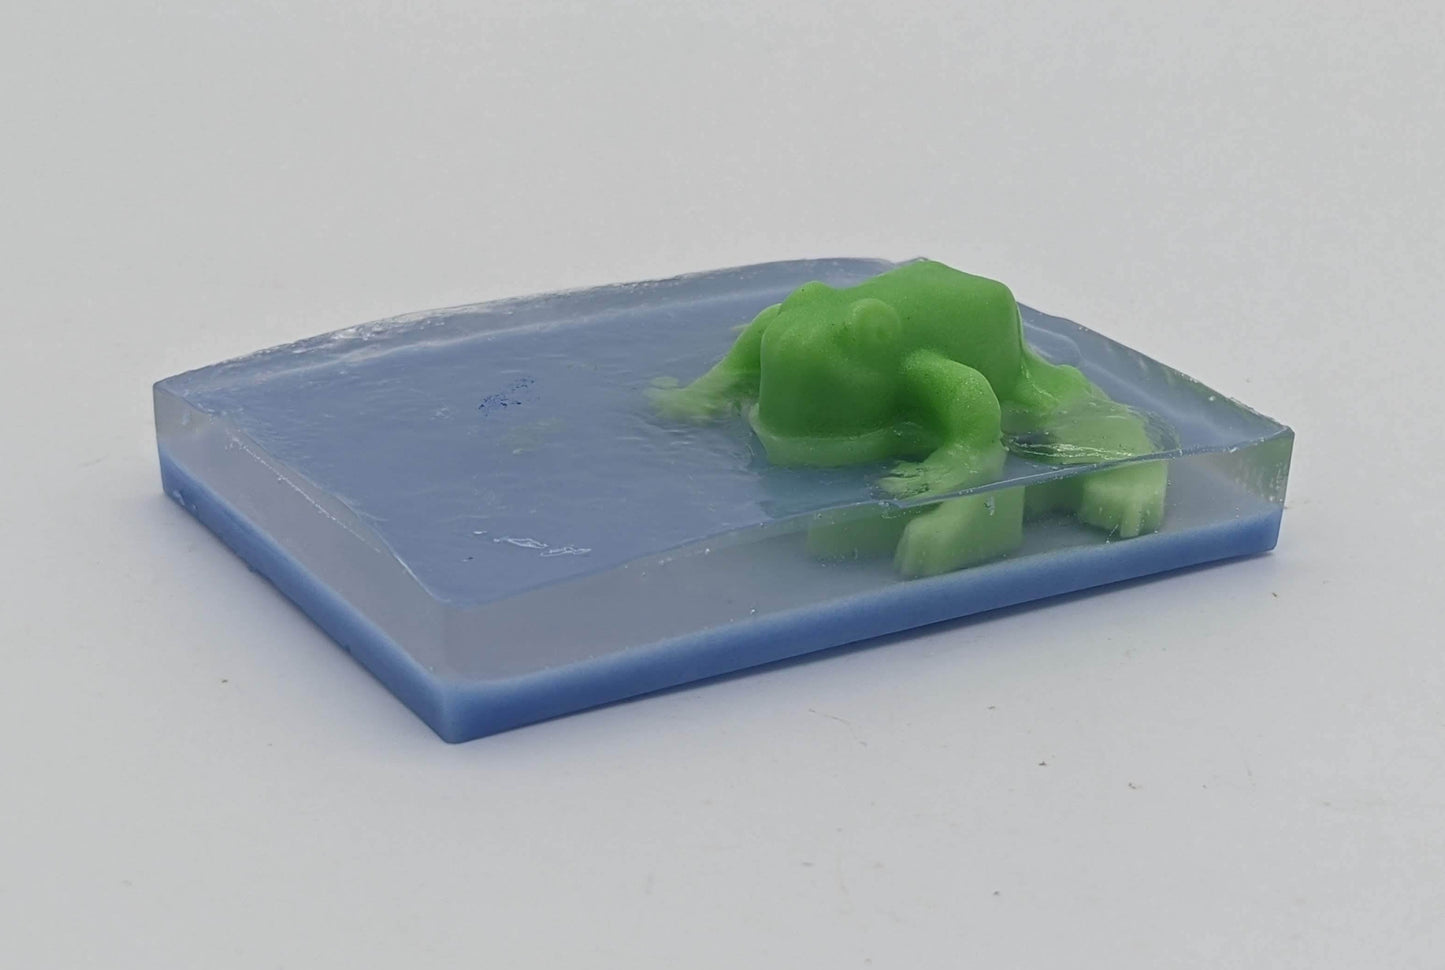 Bar soap with a green frog protruding. There is a thin layer of blue, then clear, and the green frog is embedded in the clear portion to appear as is the frog is sitting on top of water